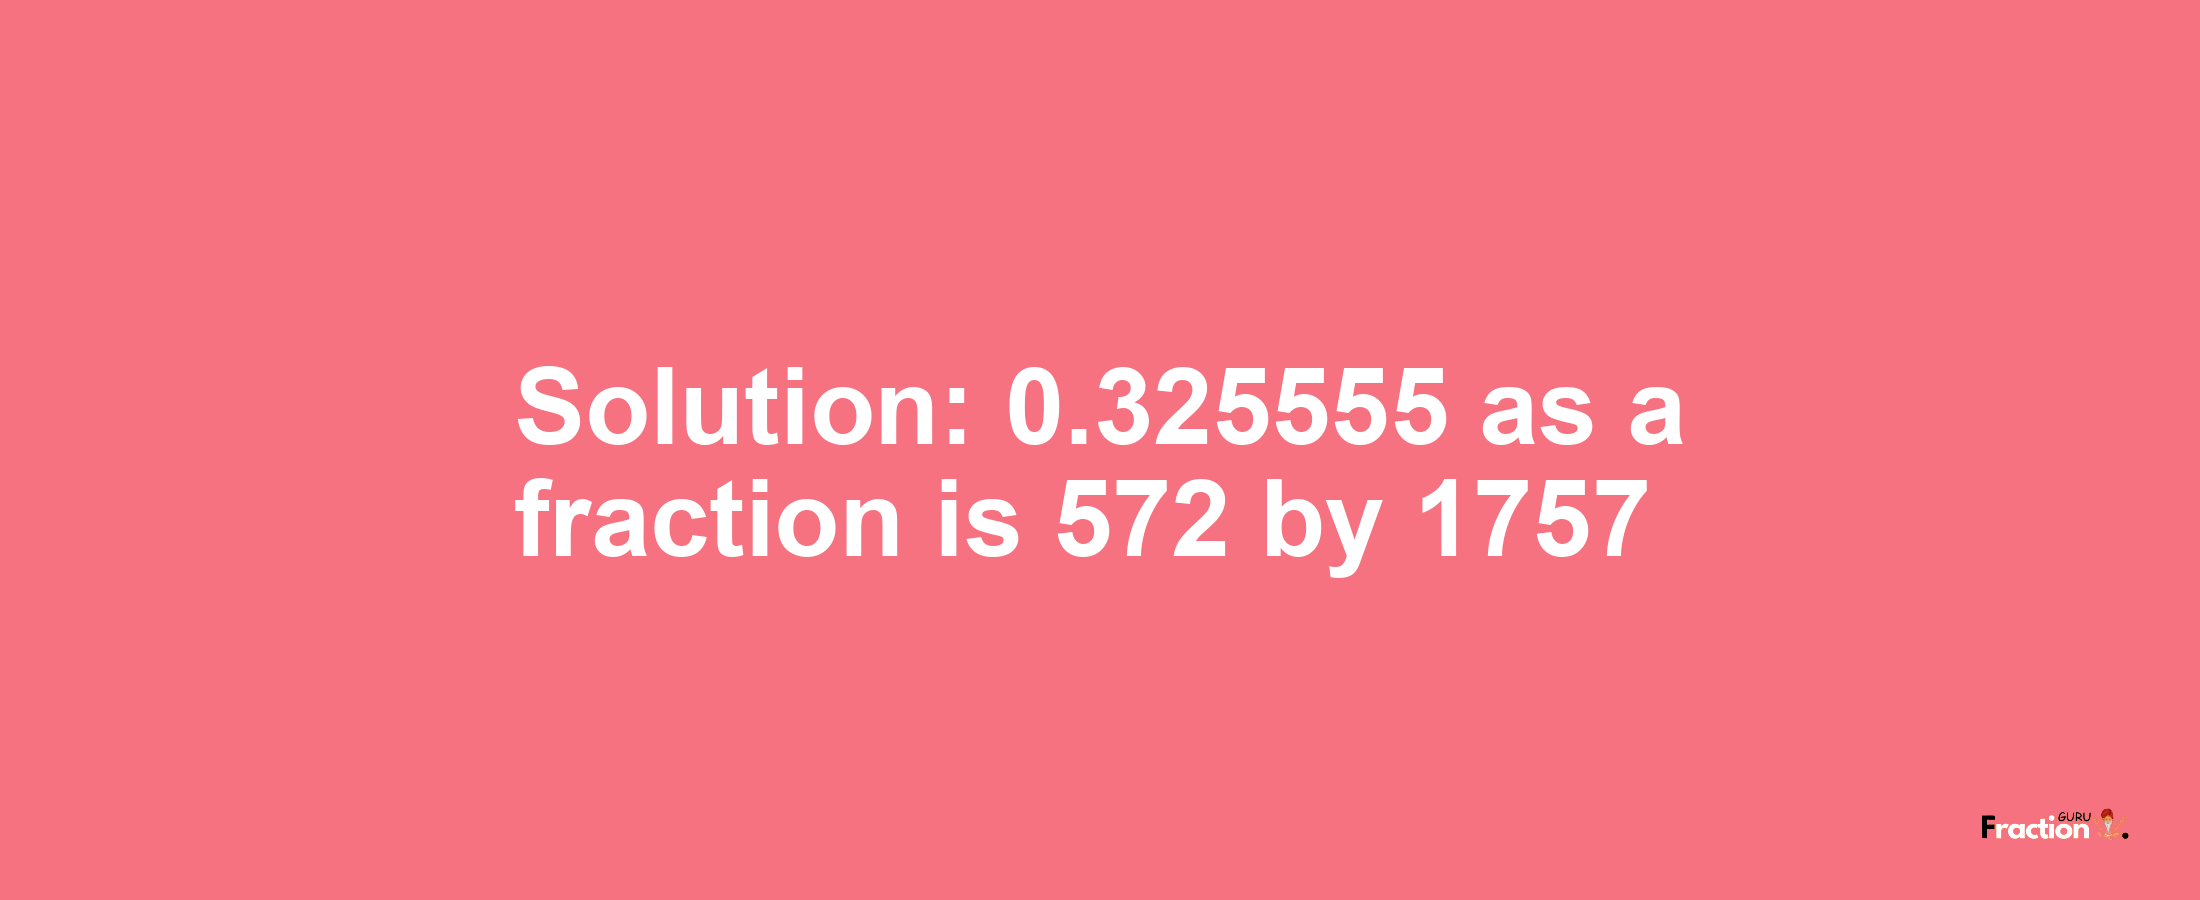 Solution:0.325555 as a fraction is 572/1757